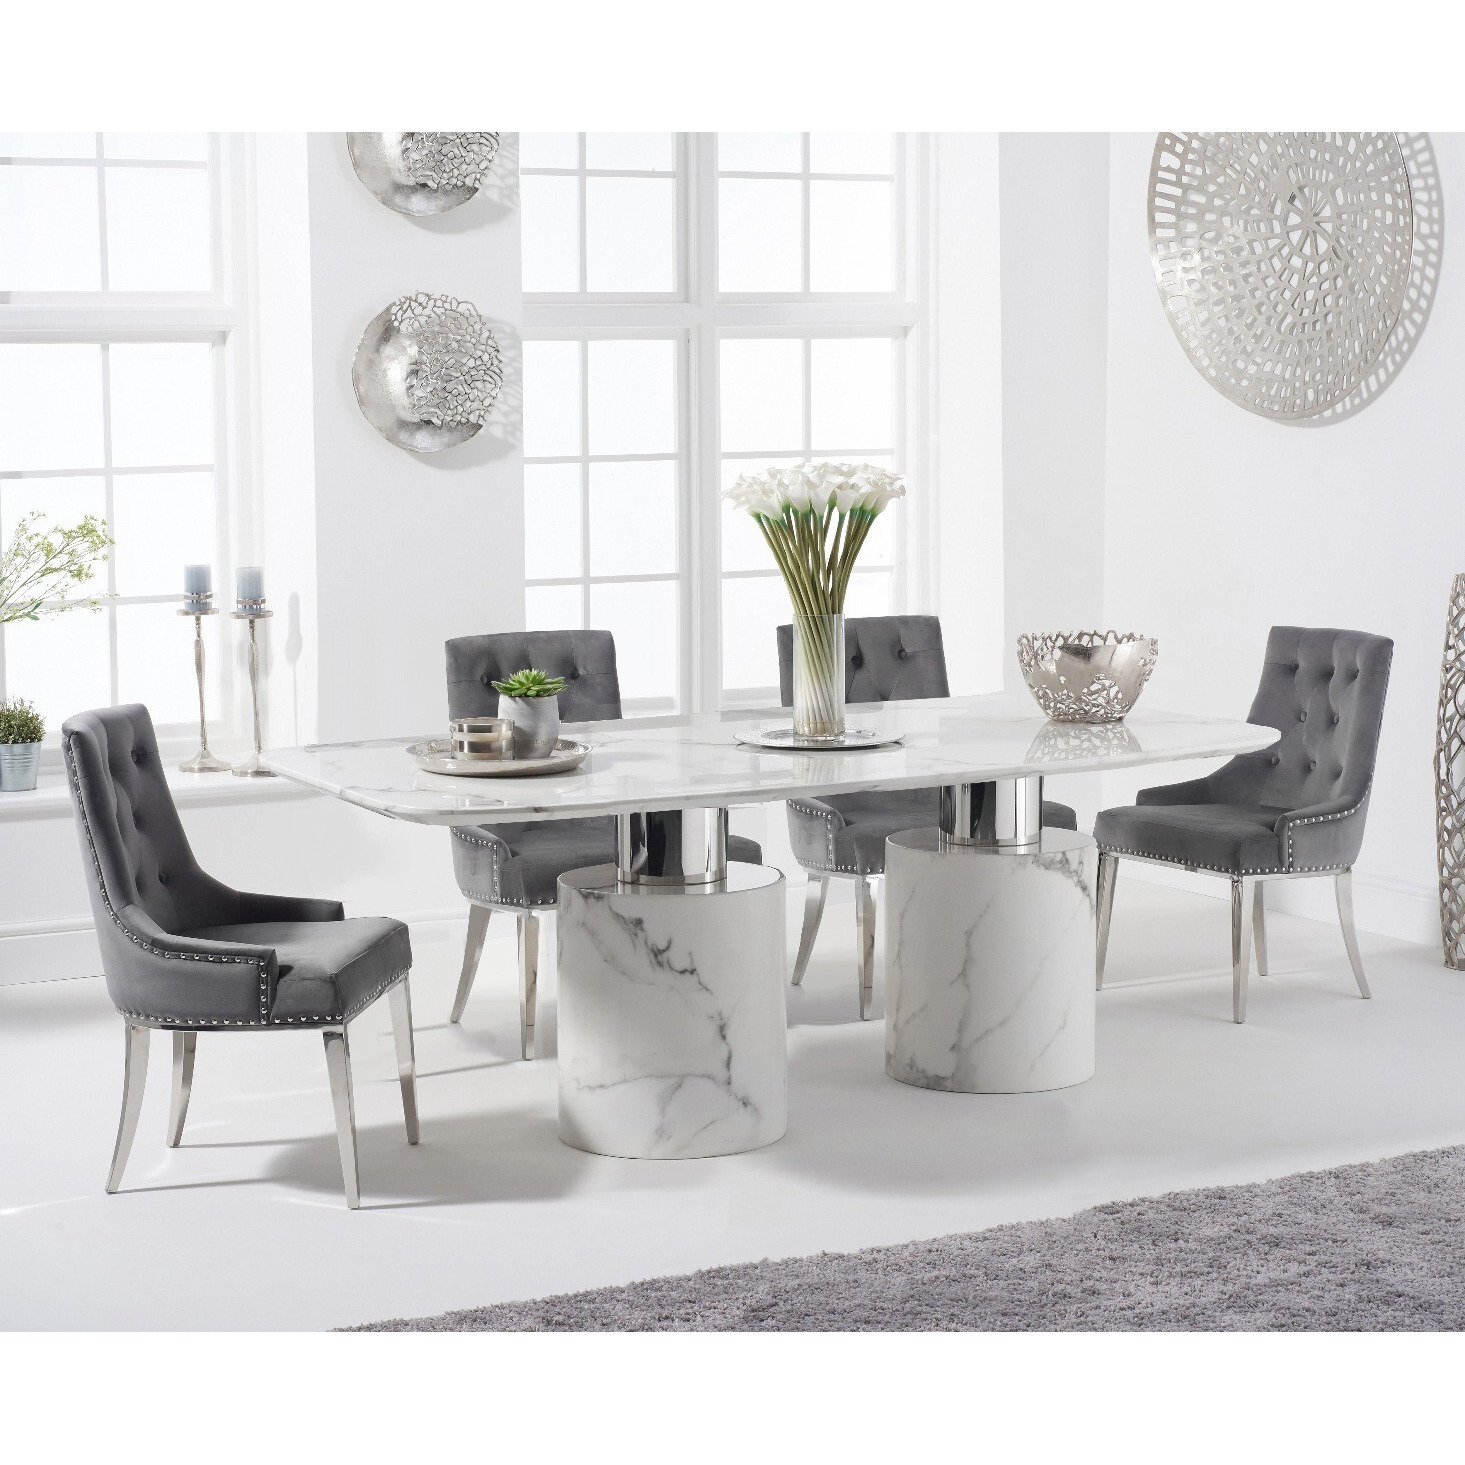 Antonio 180cm White Marble Table With 4 Grey Sienna Chairs